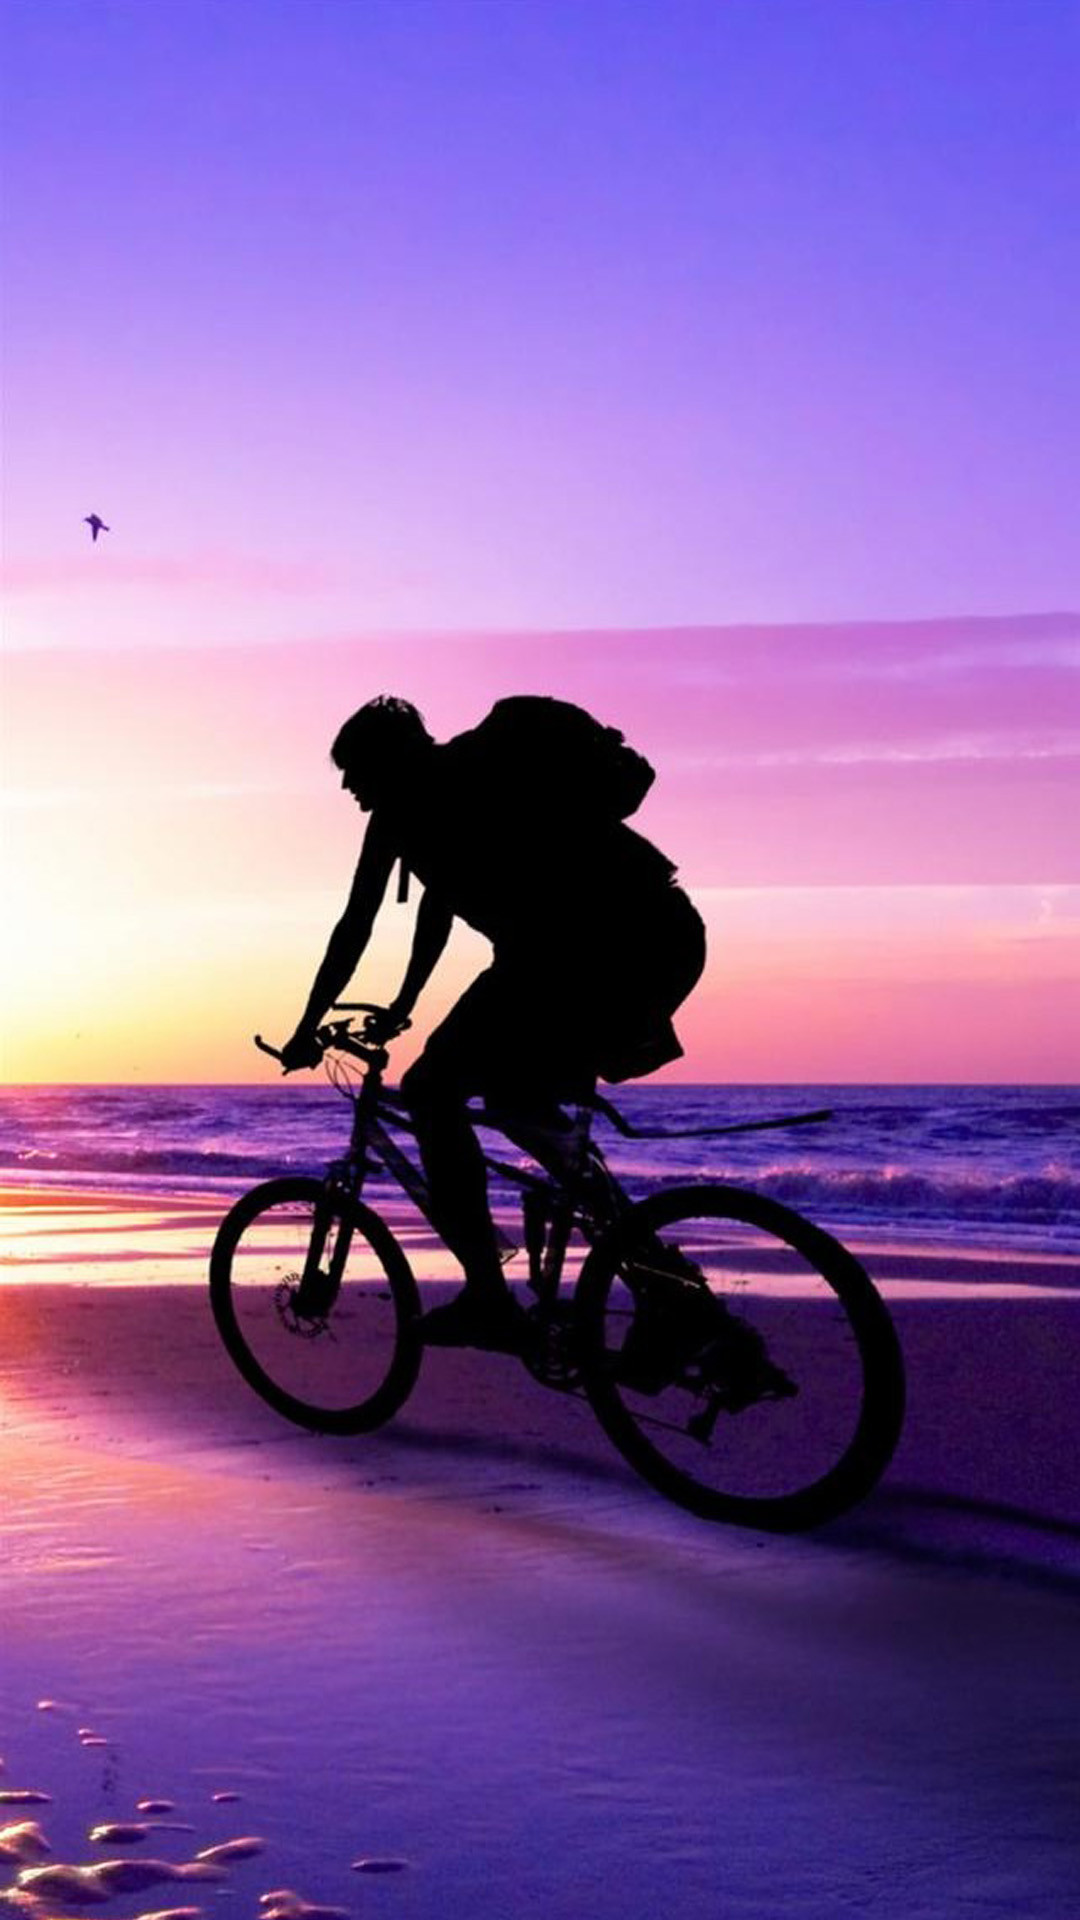 1080x1920 Beach Sunset Bicycle Ride iPhone 6 Plus hd Wallpaper